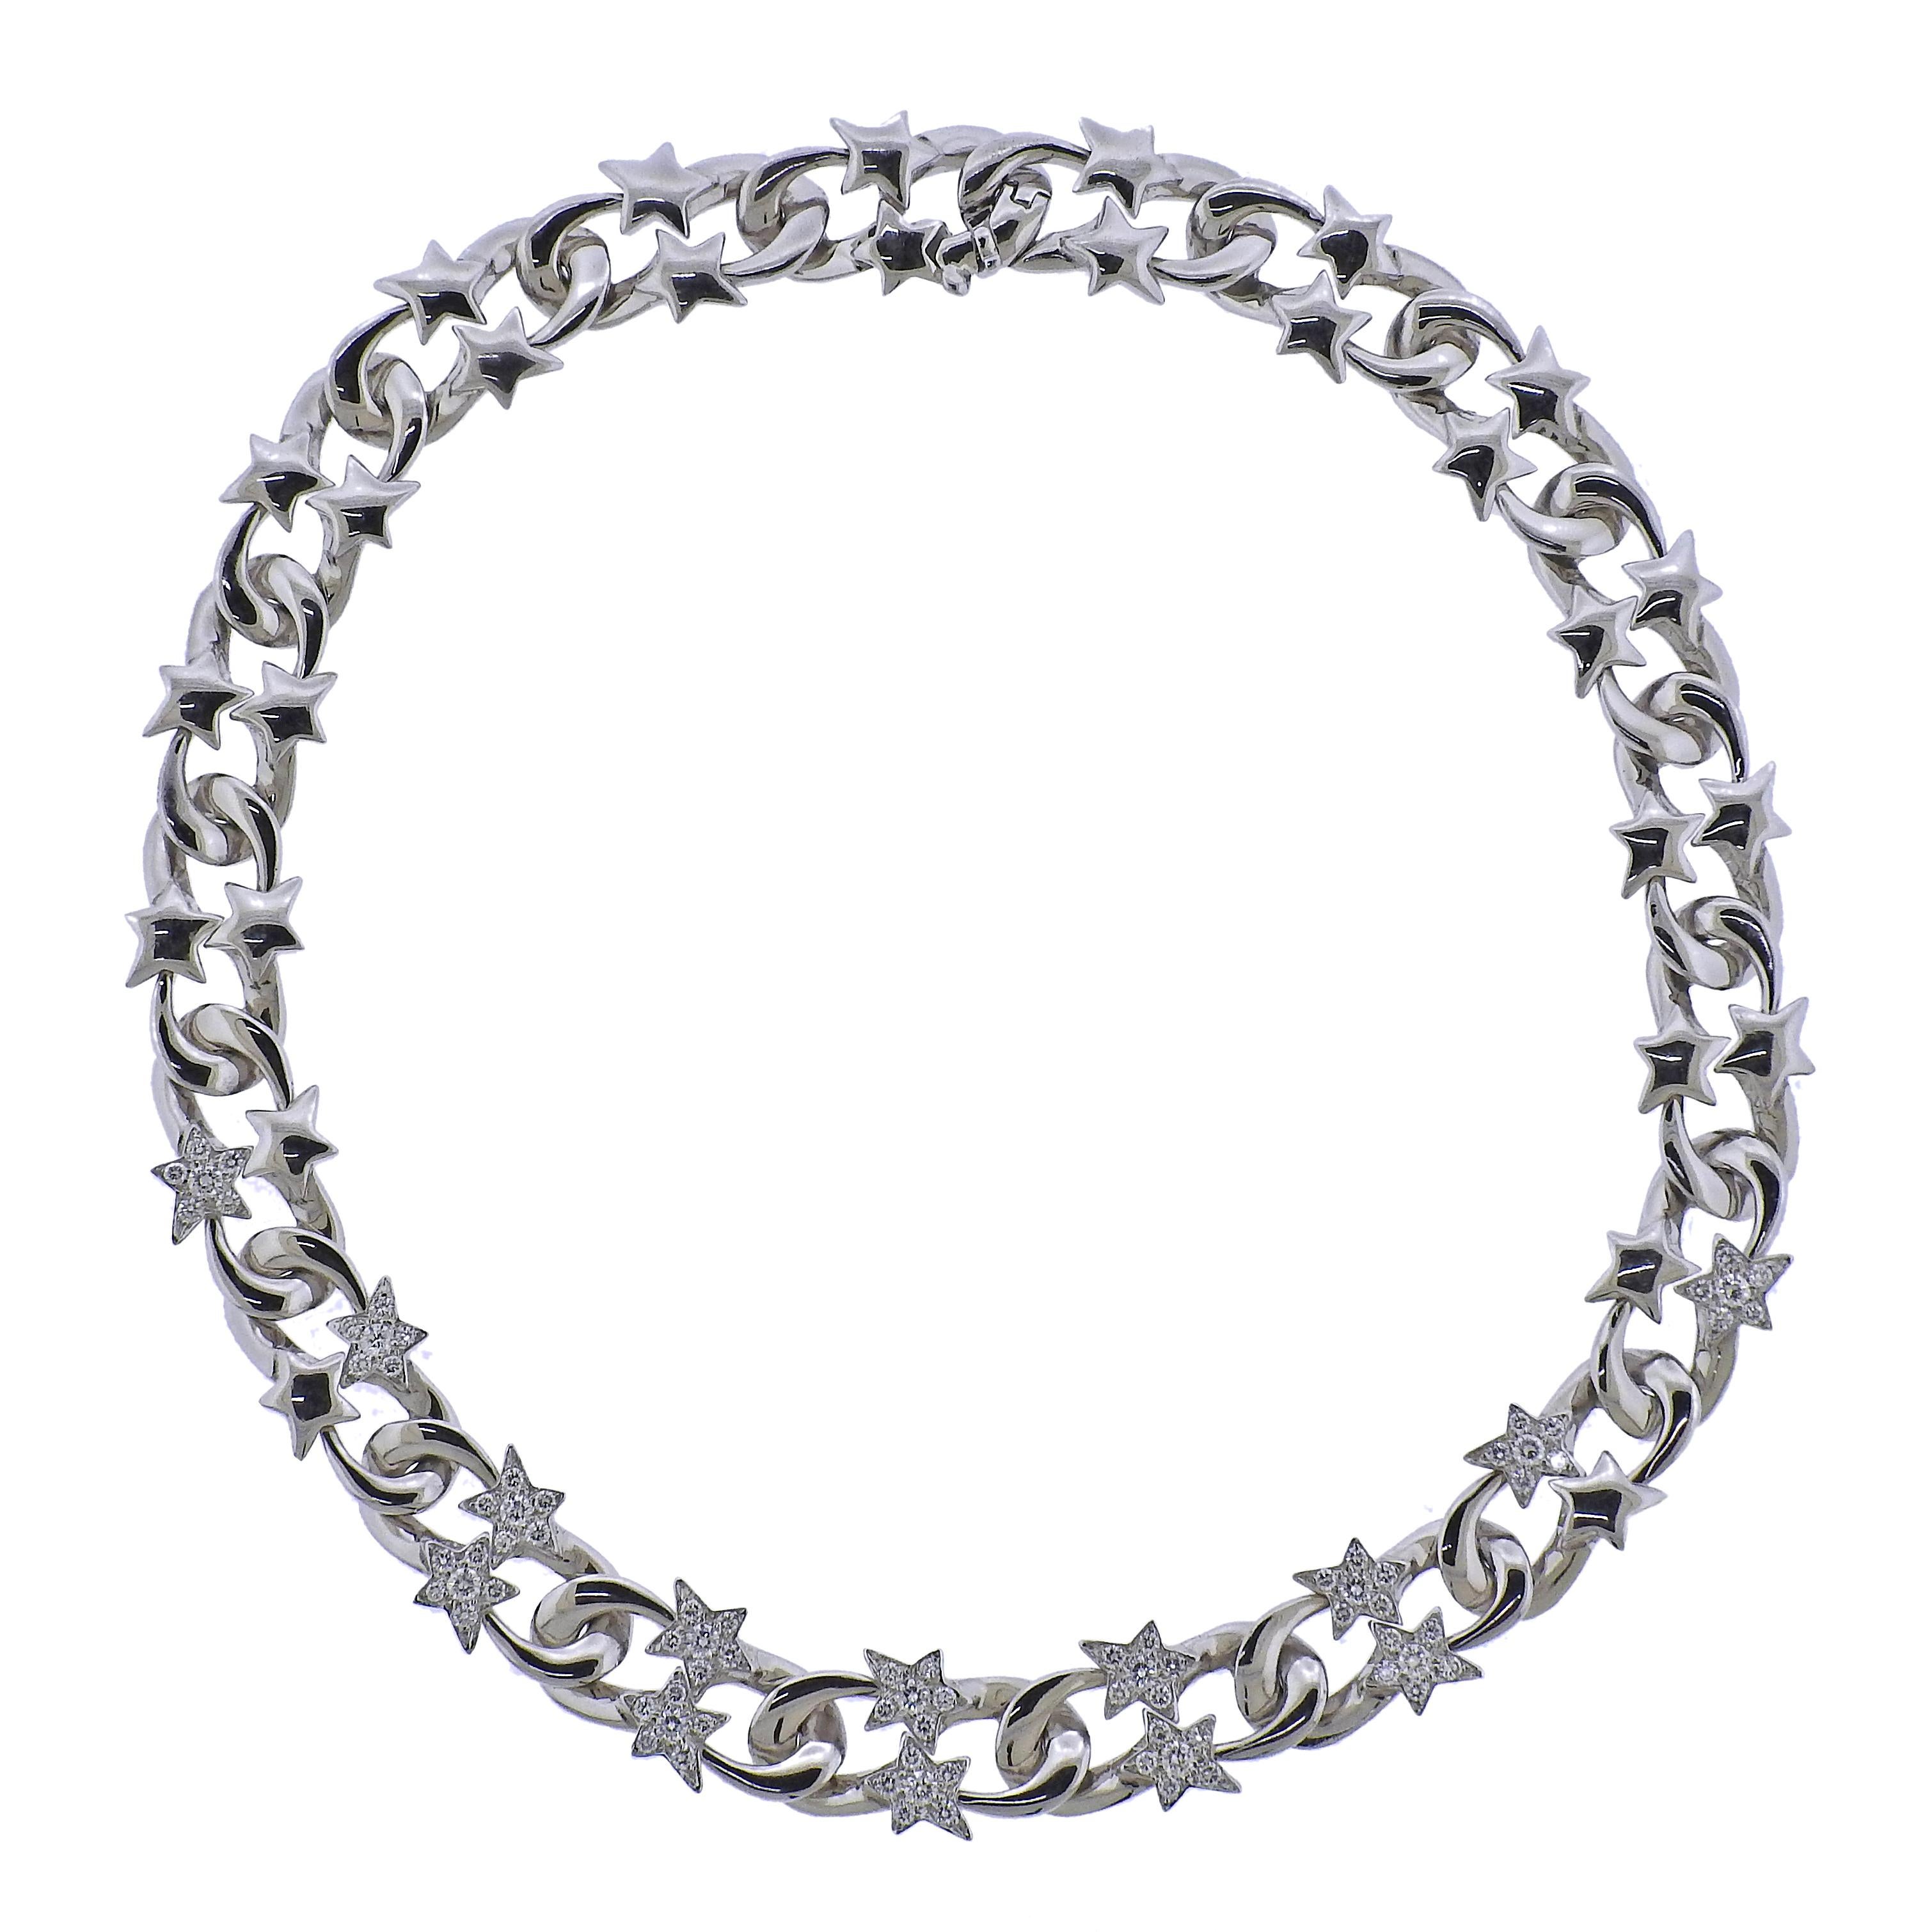  Heavy 18k white gold necklace set with approximately 2.50ctw of FG/VS diamonds.  Crafted by Chanel the necklace is 15 1/2